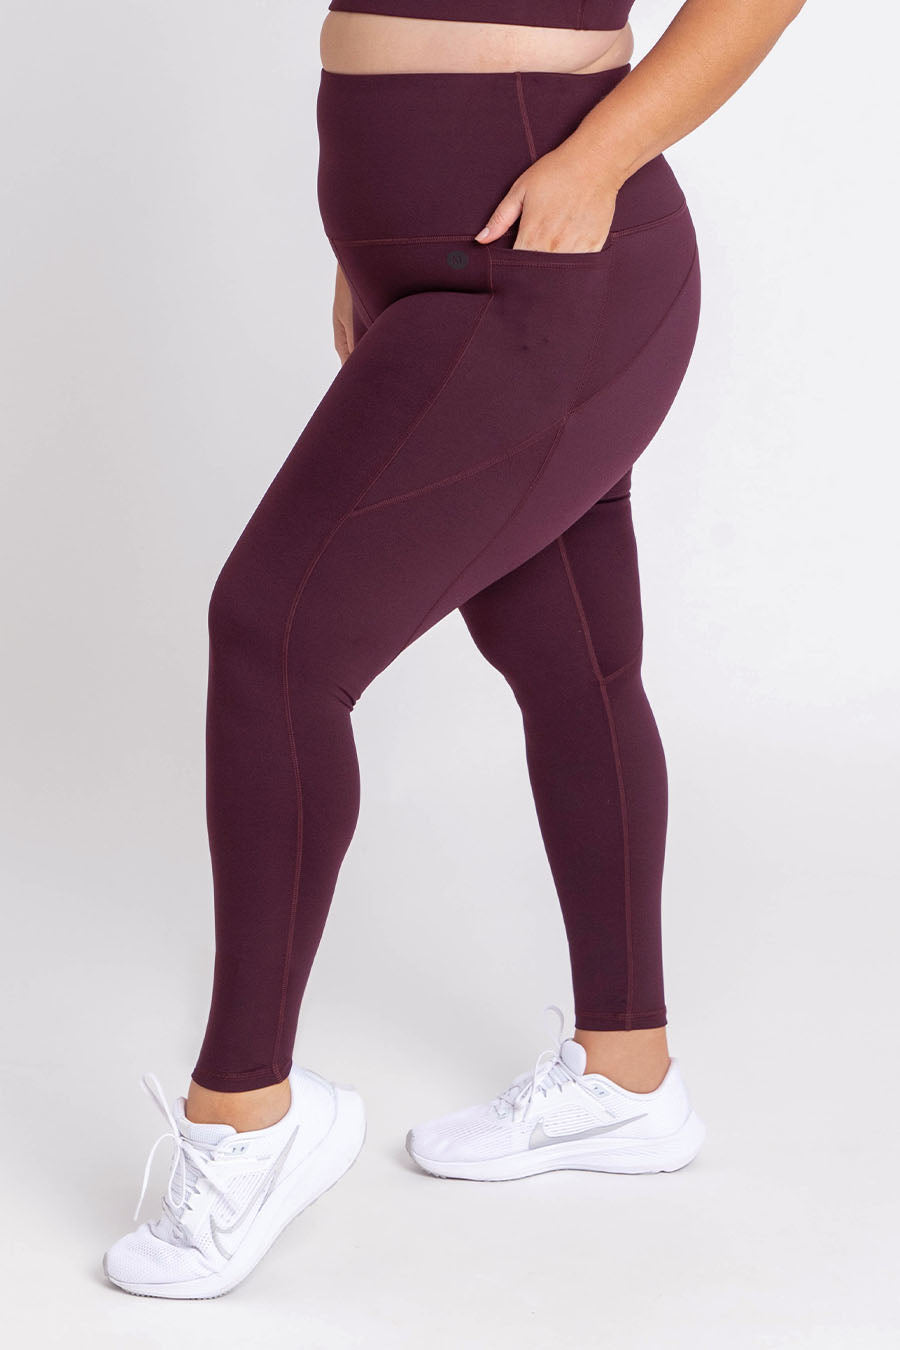 Training Pocket Full Length Tight - Wine from Active Truth™
